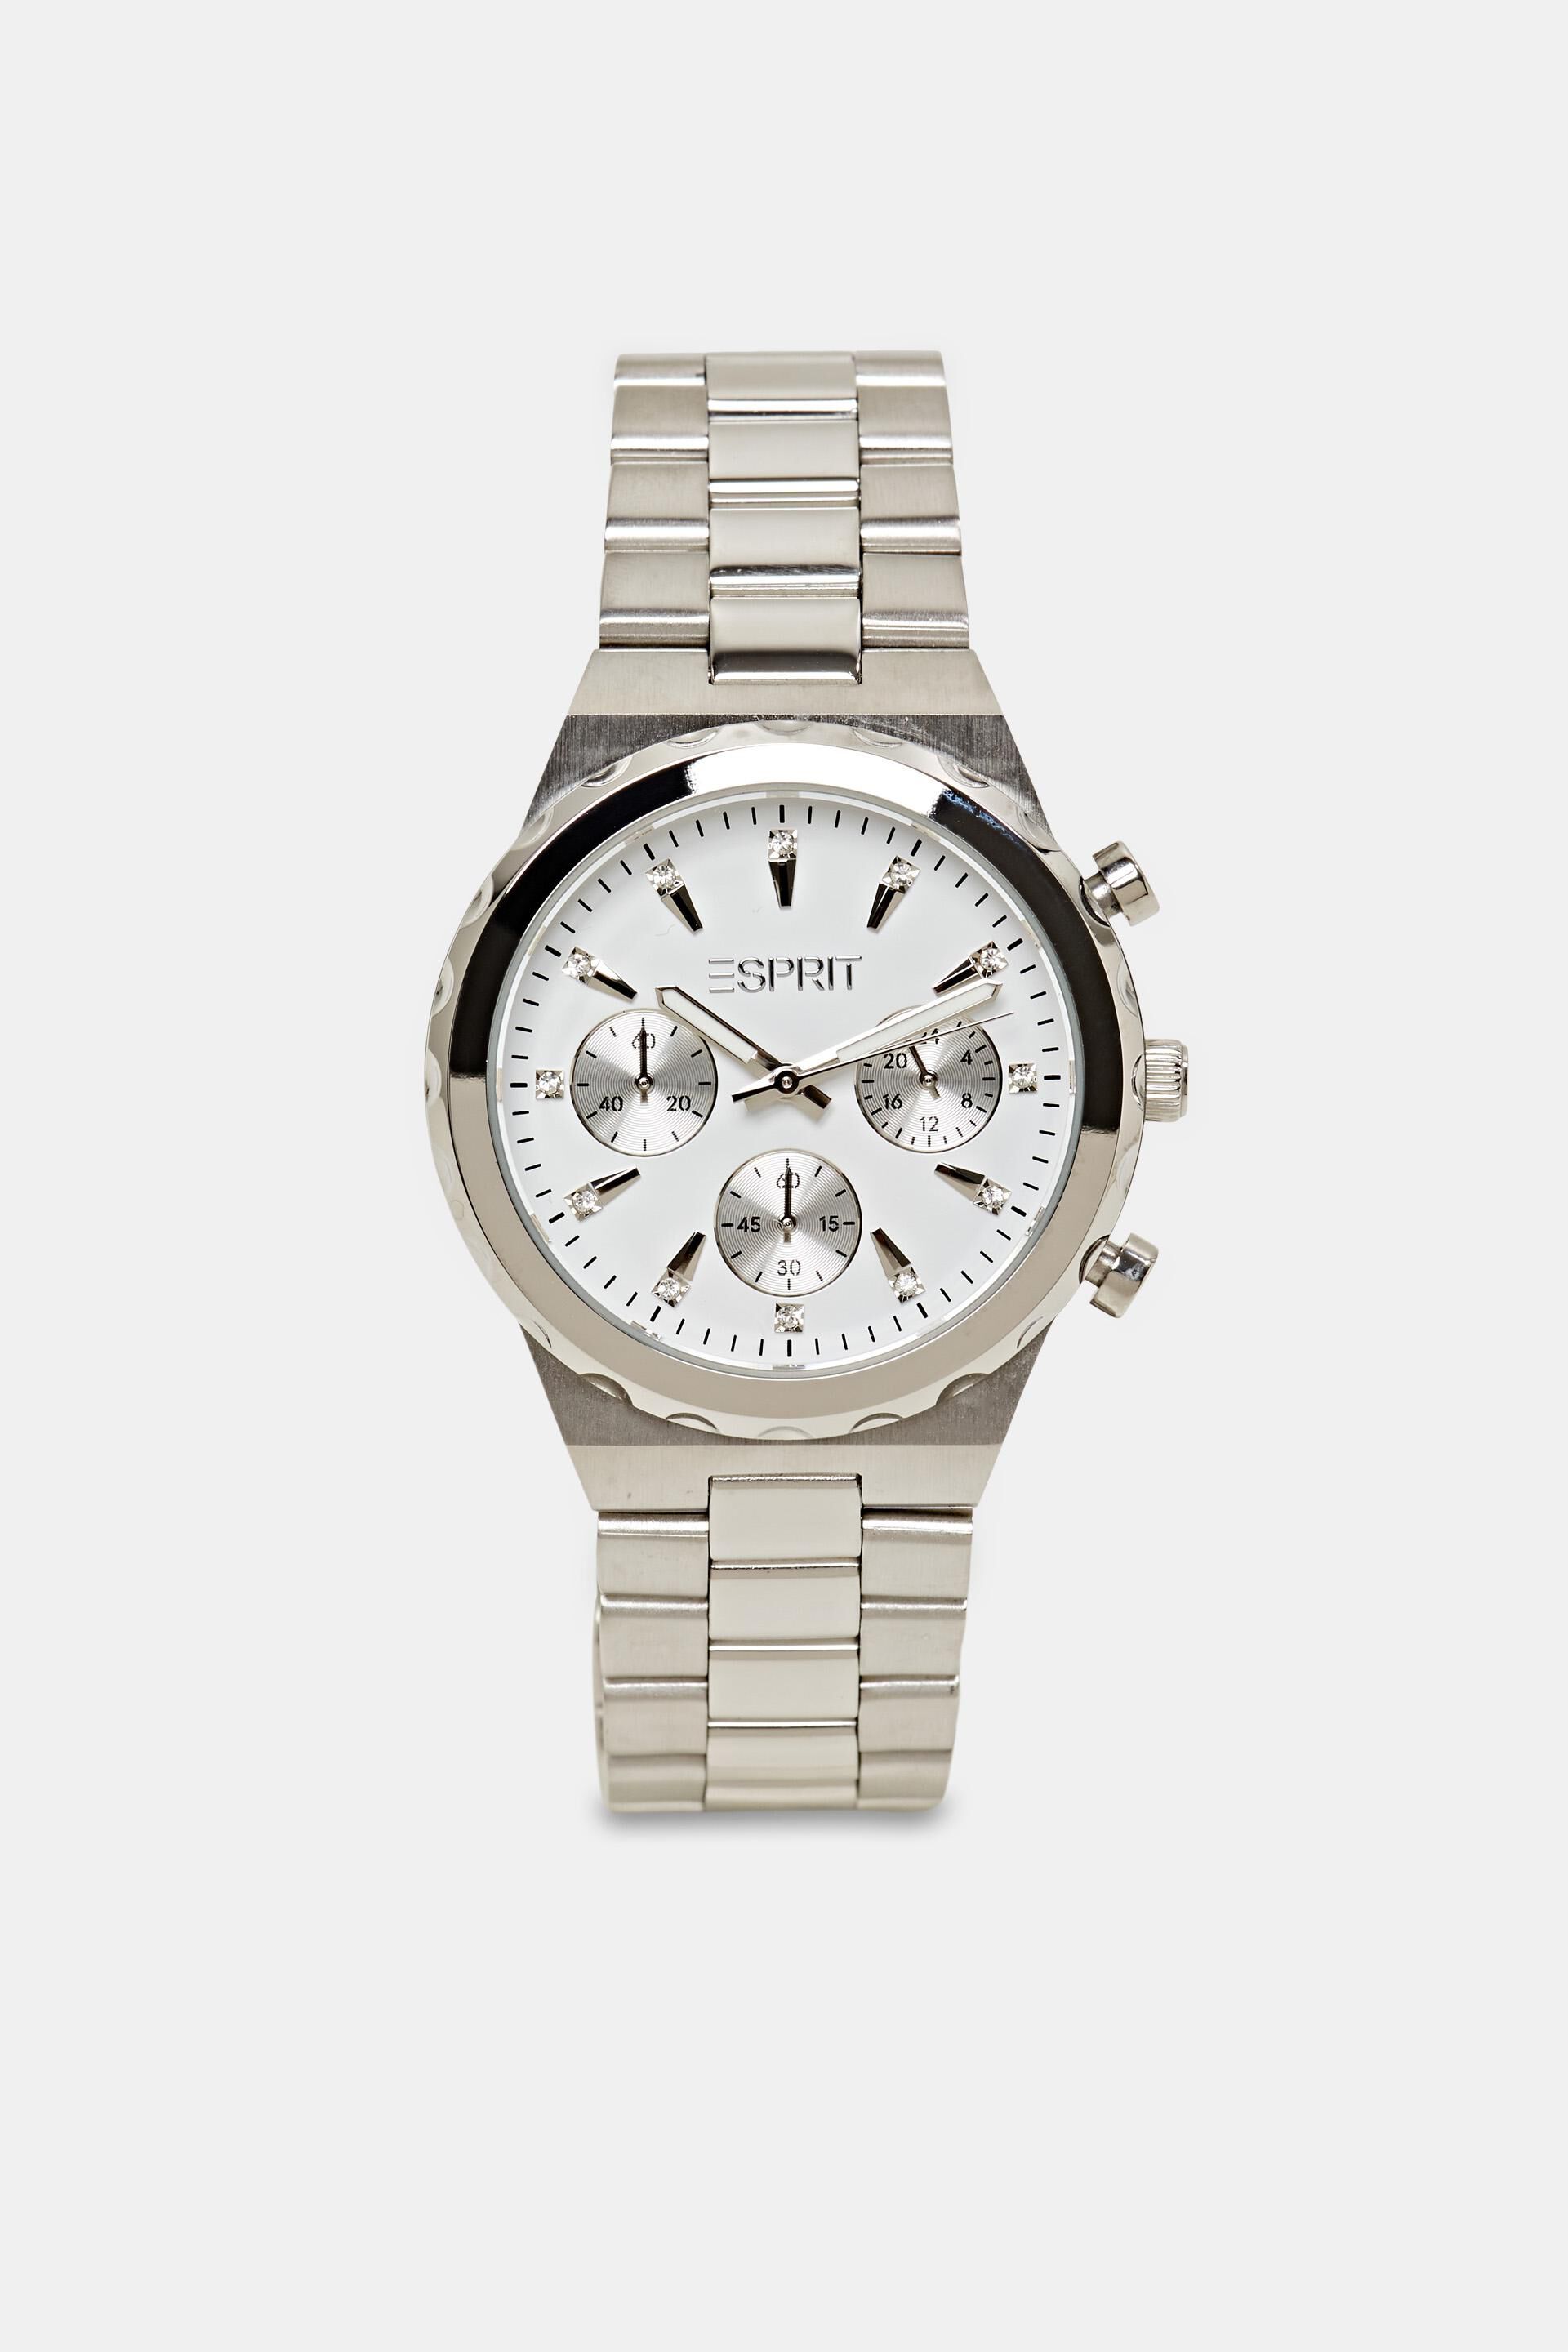 Esprit Online Store Stainless-steel chronograph with a bracelet link